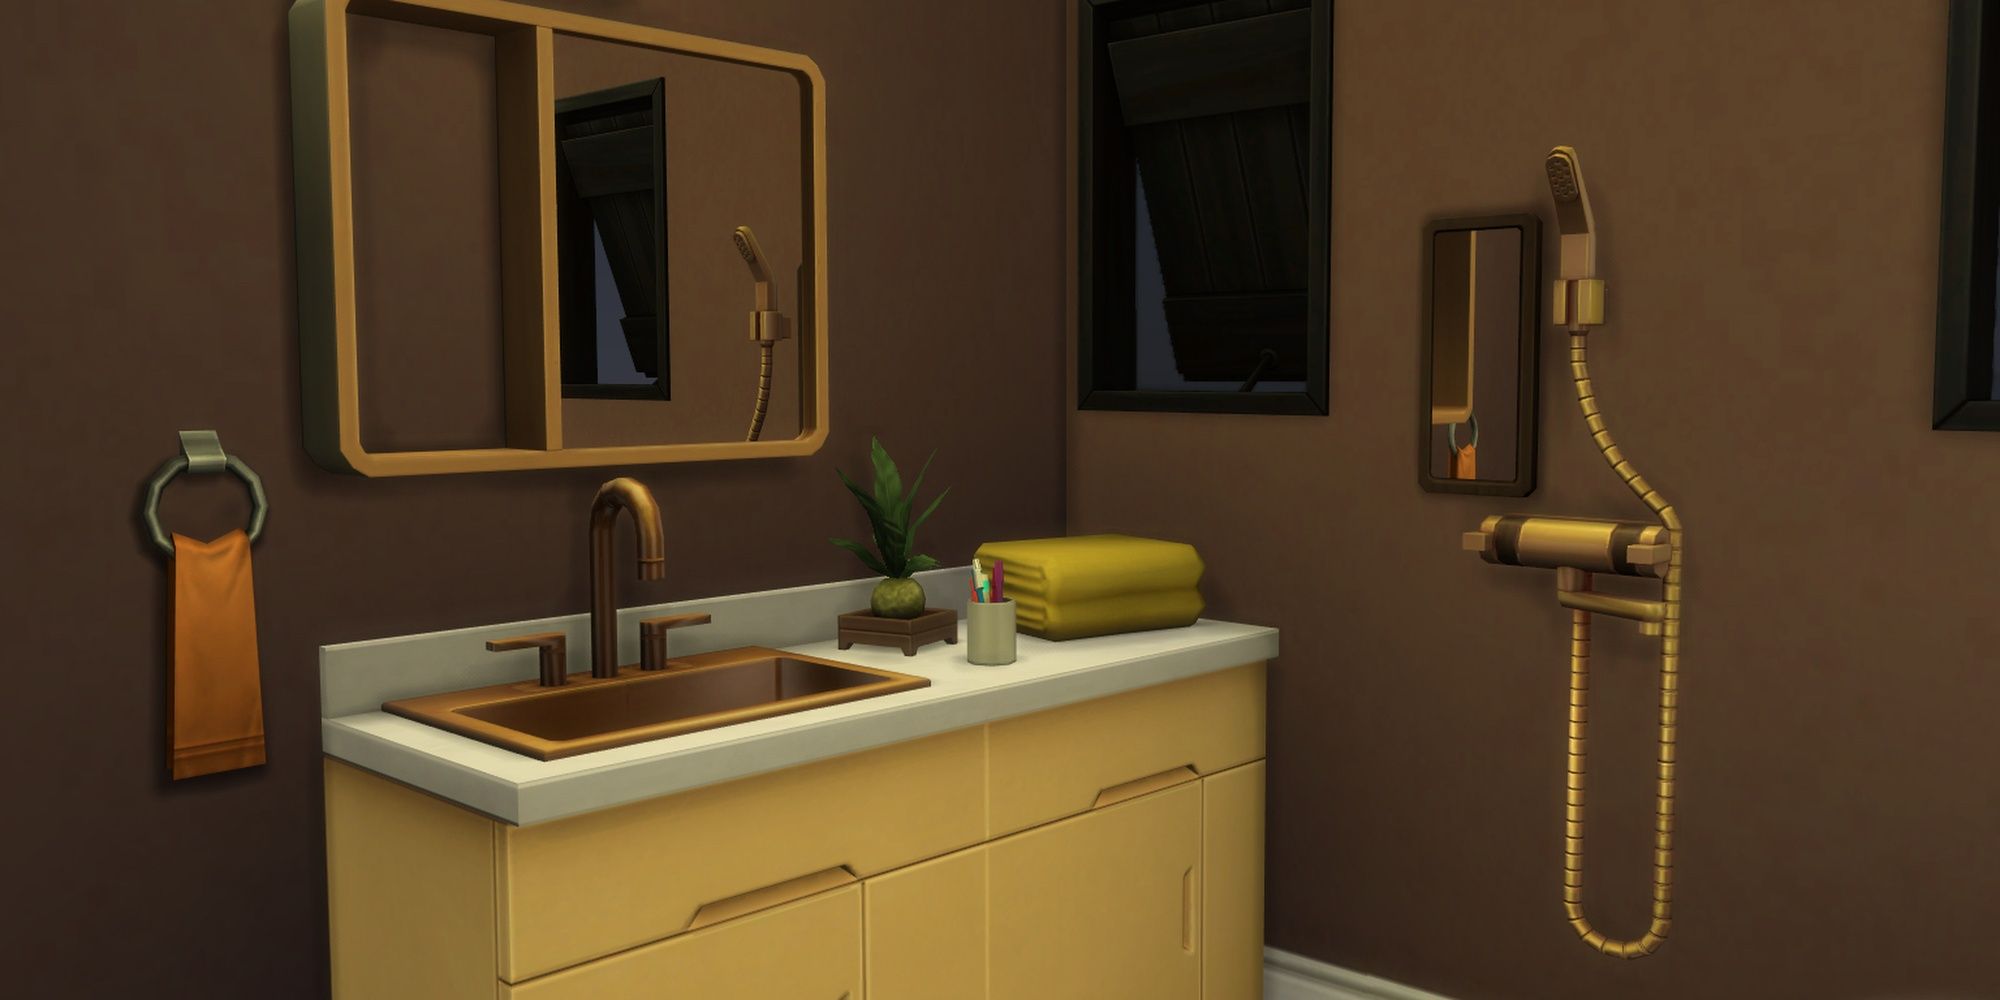 A simple brass shower from The Sims 4: Snowy Escape style into a bathroom of earthy colors.